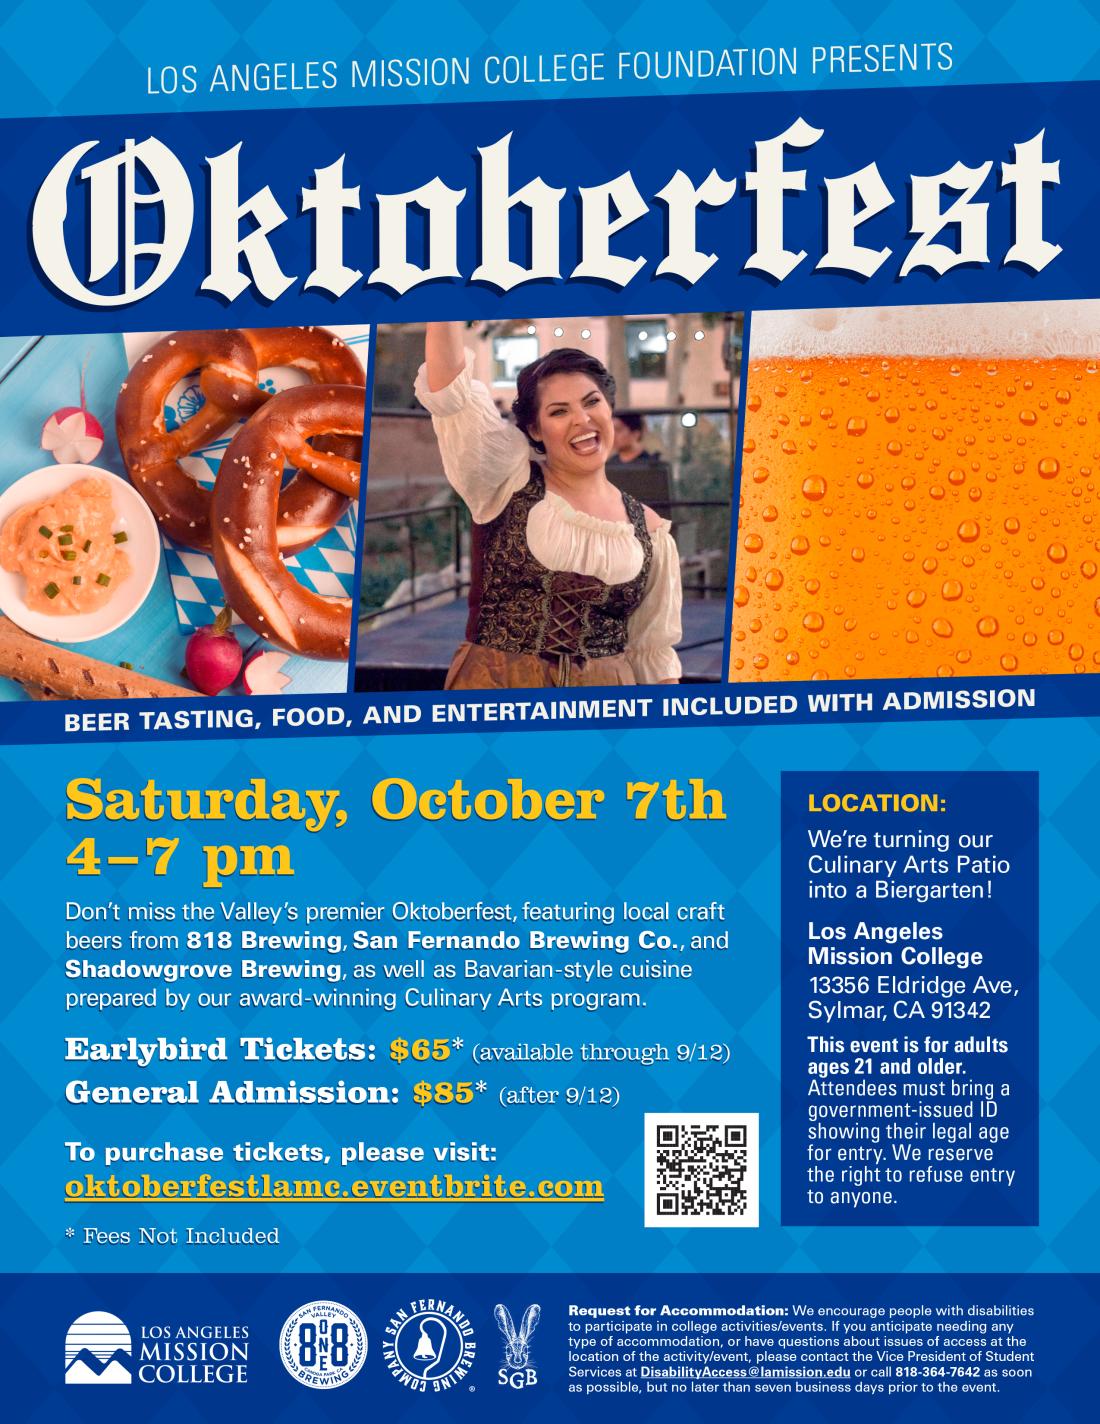 The Valley’s premier Oktoberfest on Saturday, October 7th